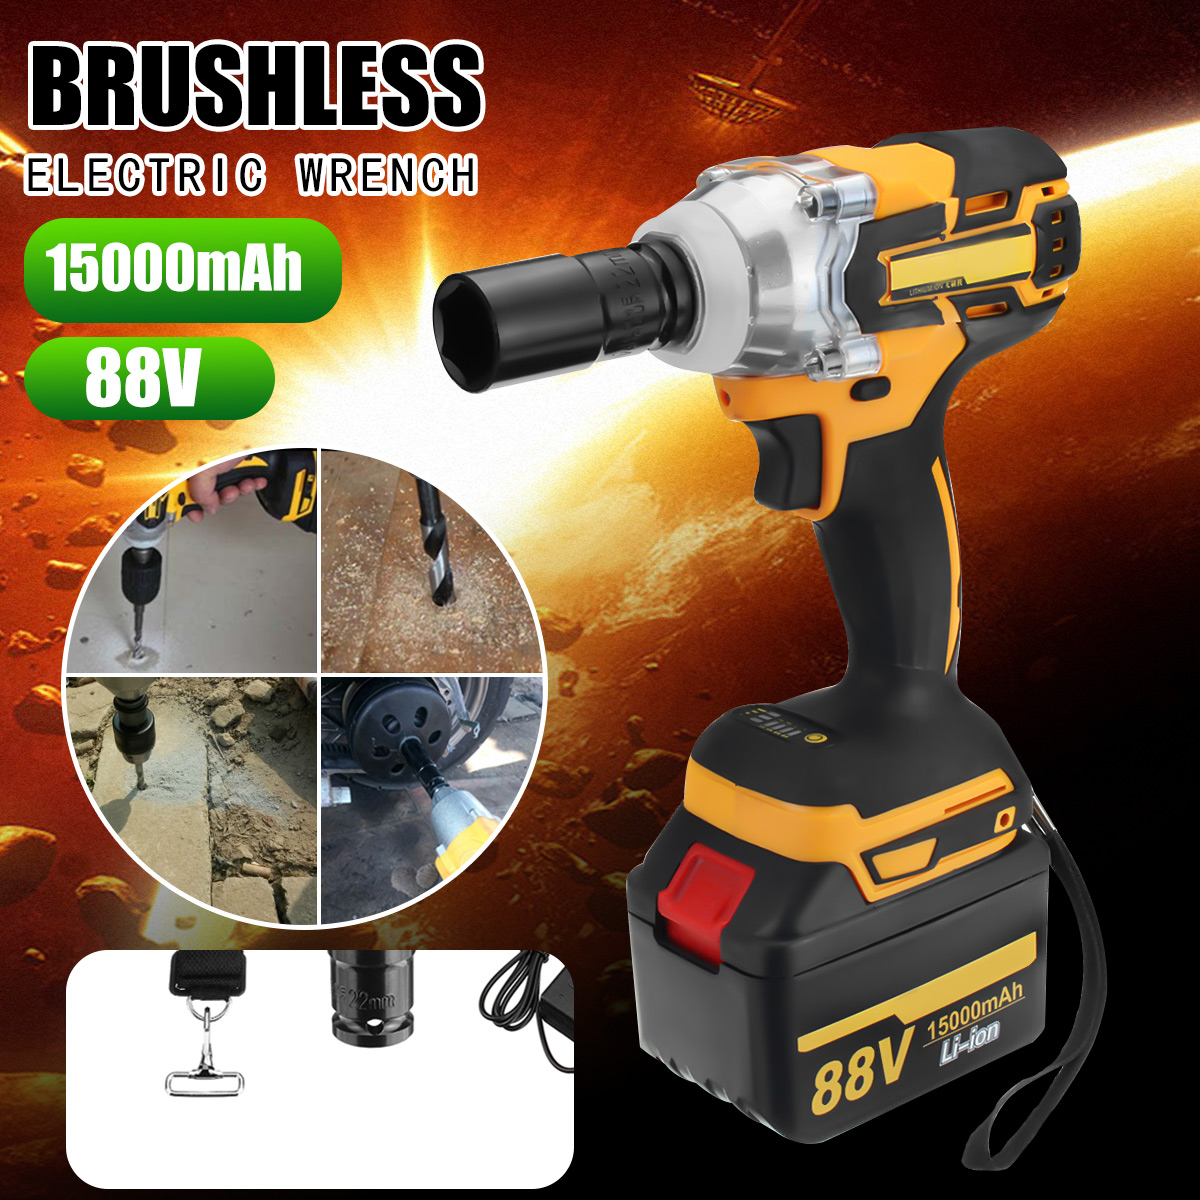 88V-15000mAh-Electric-Wrench-2-Batteries-1-Charger-Brushless-Cordless-Drive-Impact-Wrench-Tools-1282967-1